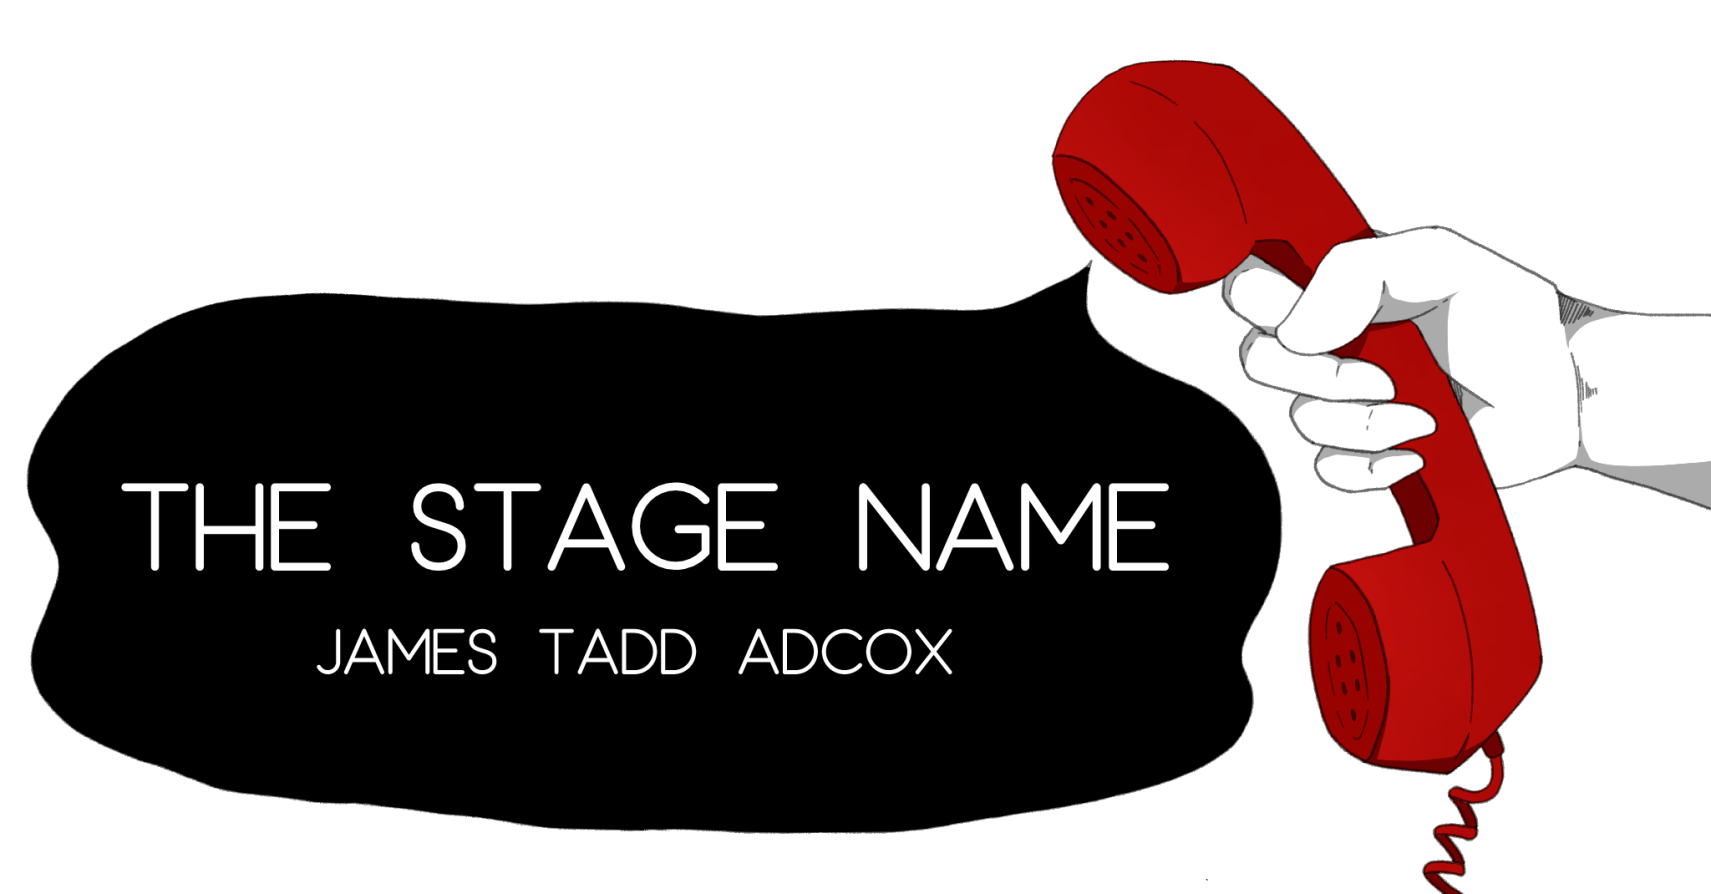 THE STAGE NAME by James Tadd Adcox